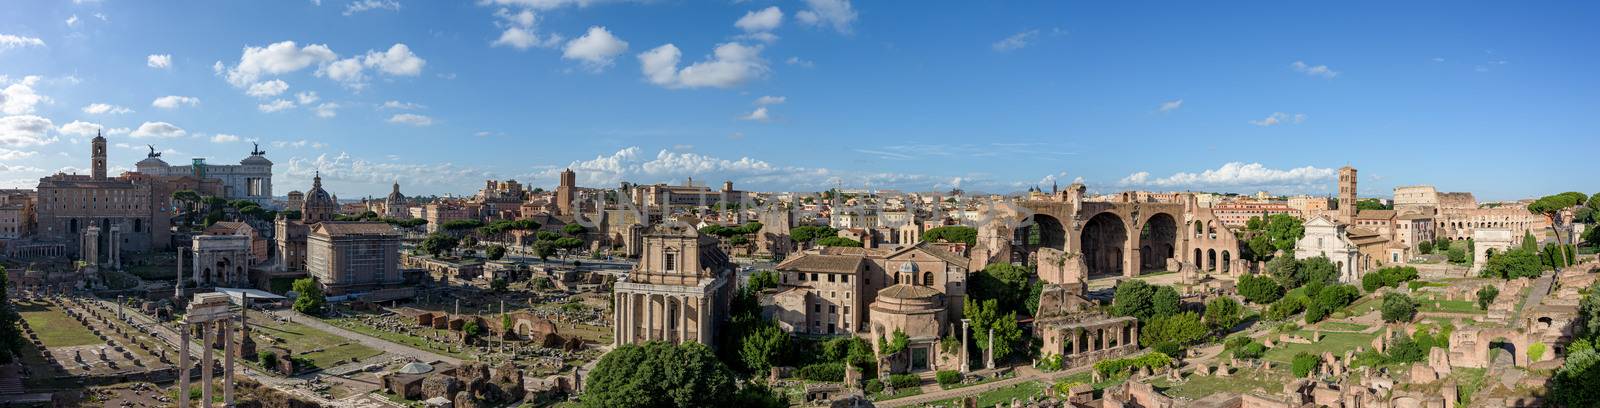 Panorama of the ancient Roman Forums, an archeological park with ancient temples of the Roman Empire, basilica churches and public buildings, near the Colosseum theater and the Capitoline Hill, in the city centre of Rome, Italy